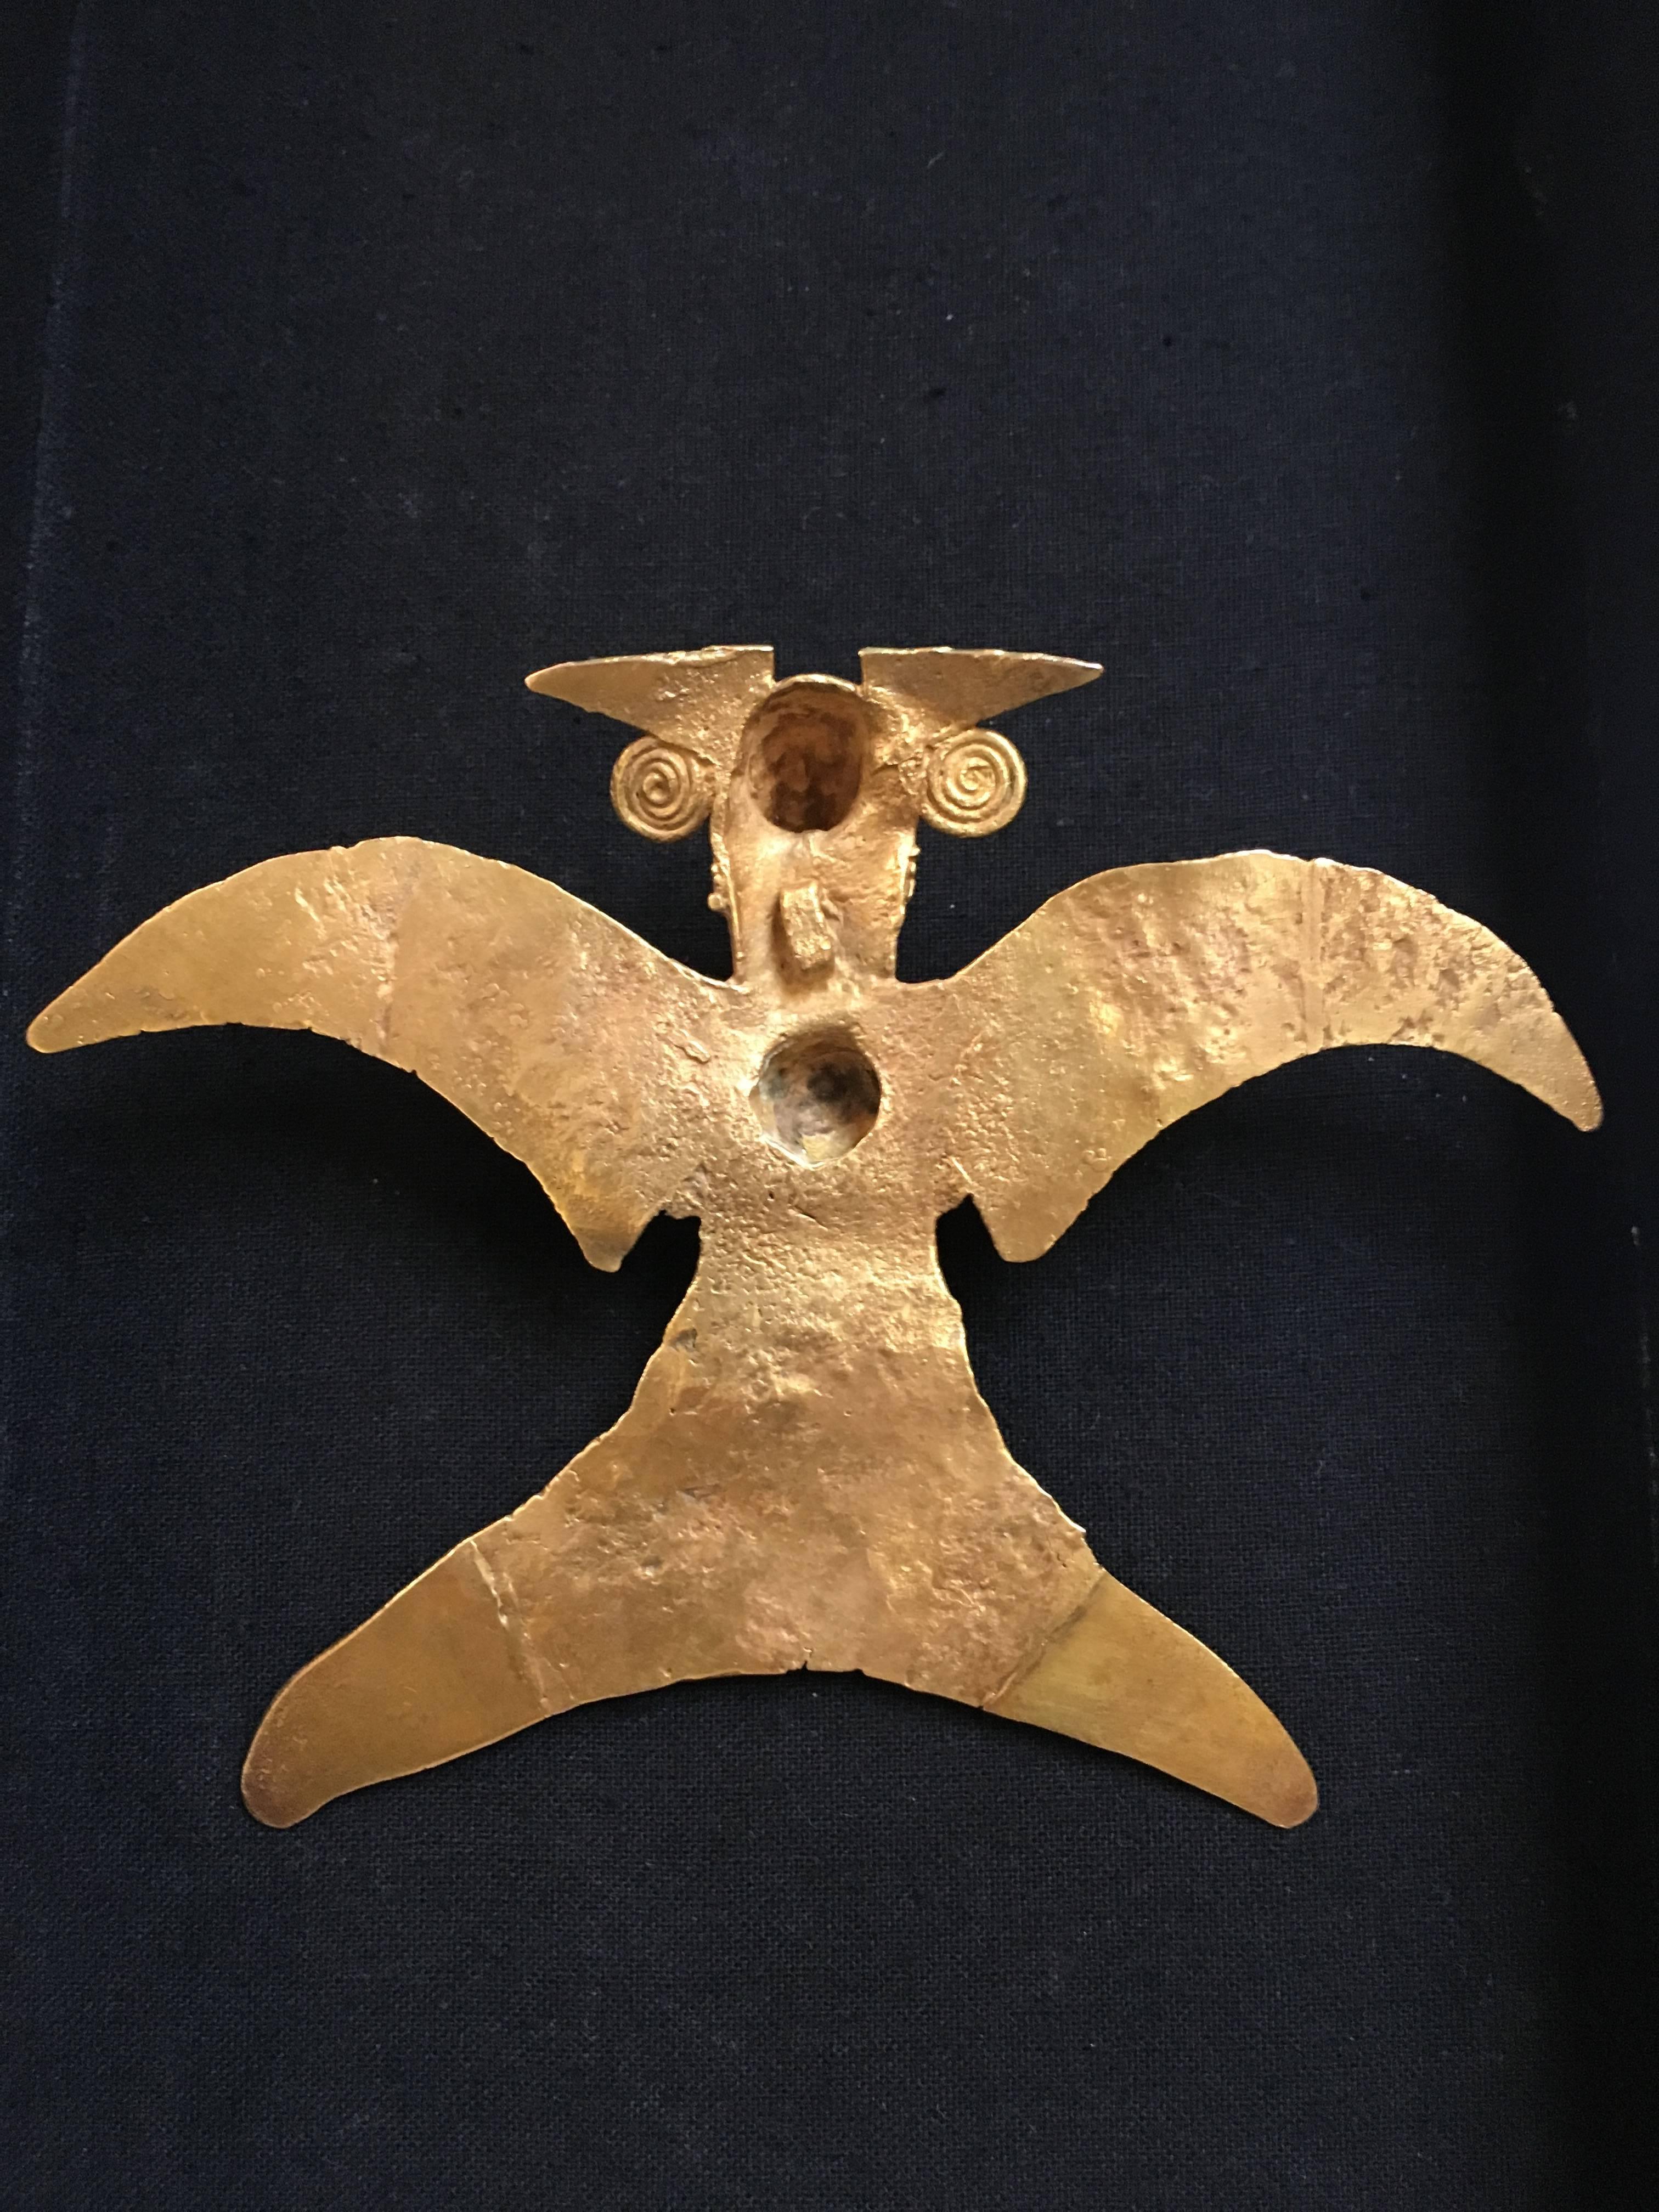 A stunning, large, 22k cast gold pendant in the shape of an eagle, Veraguas culture, Panama, circa 900 to 1200 AD. 
The large pendant cast in 22k gold using the lost wax technique. The eagle with wings outspread in a dramatic fashion, with taloned